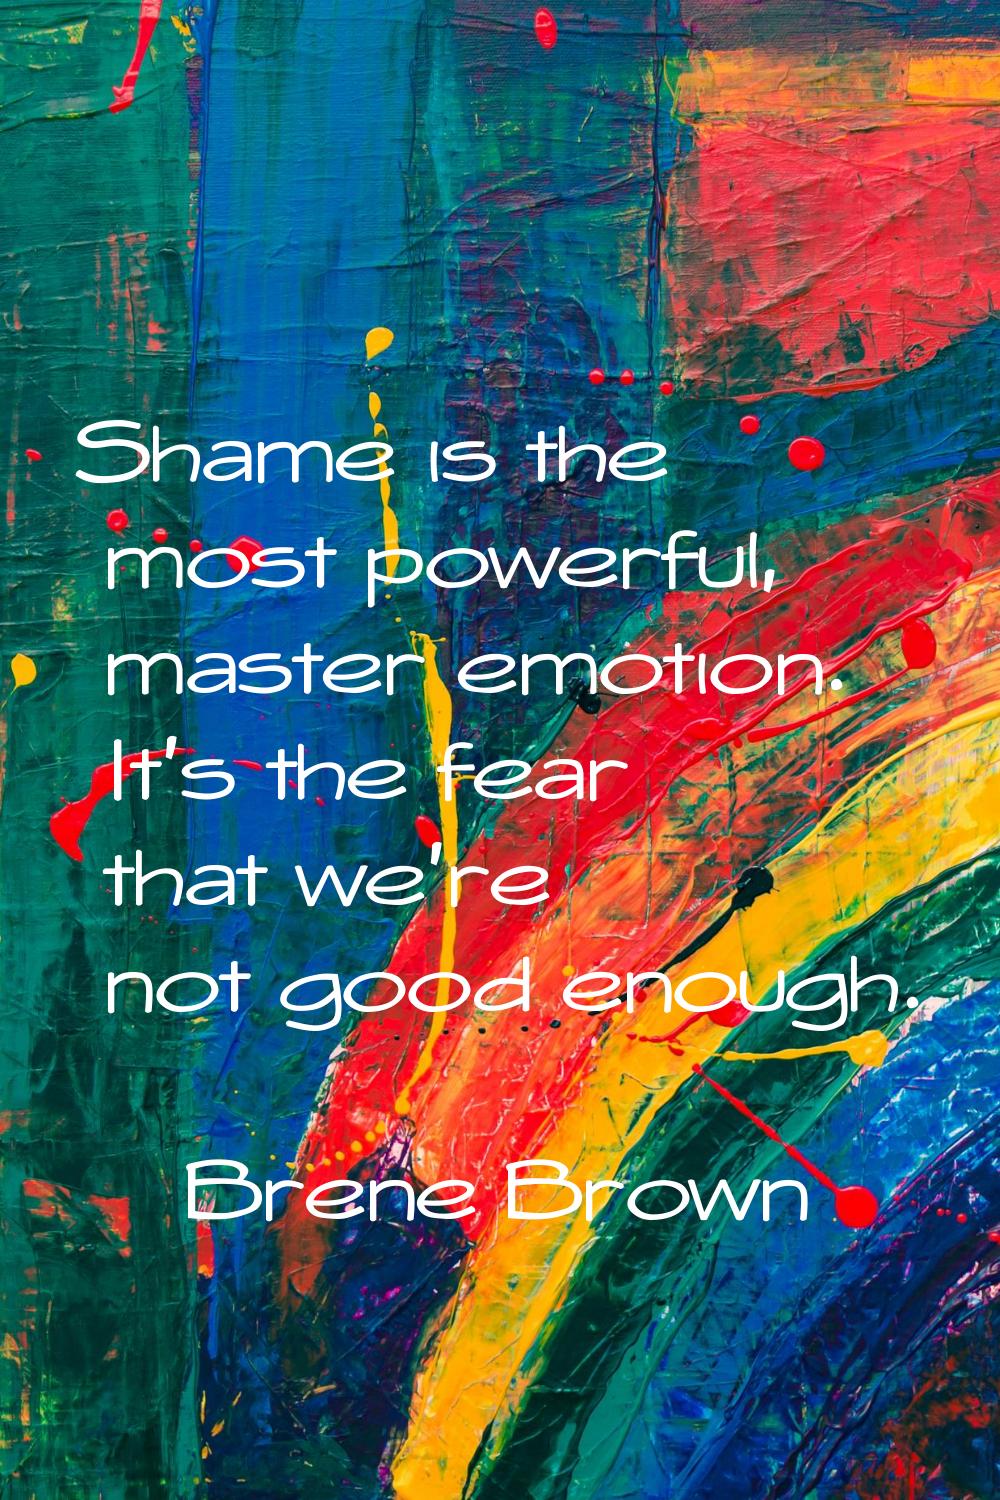 Shame is the most powerful, master emotion. It's the fear that we're not good enough.